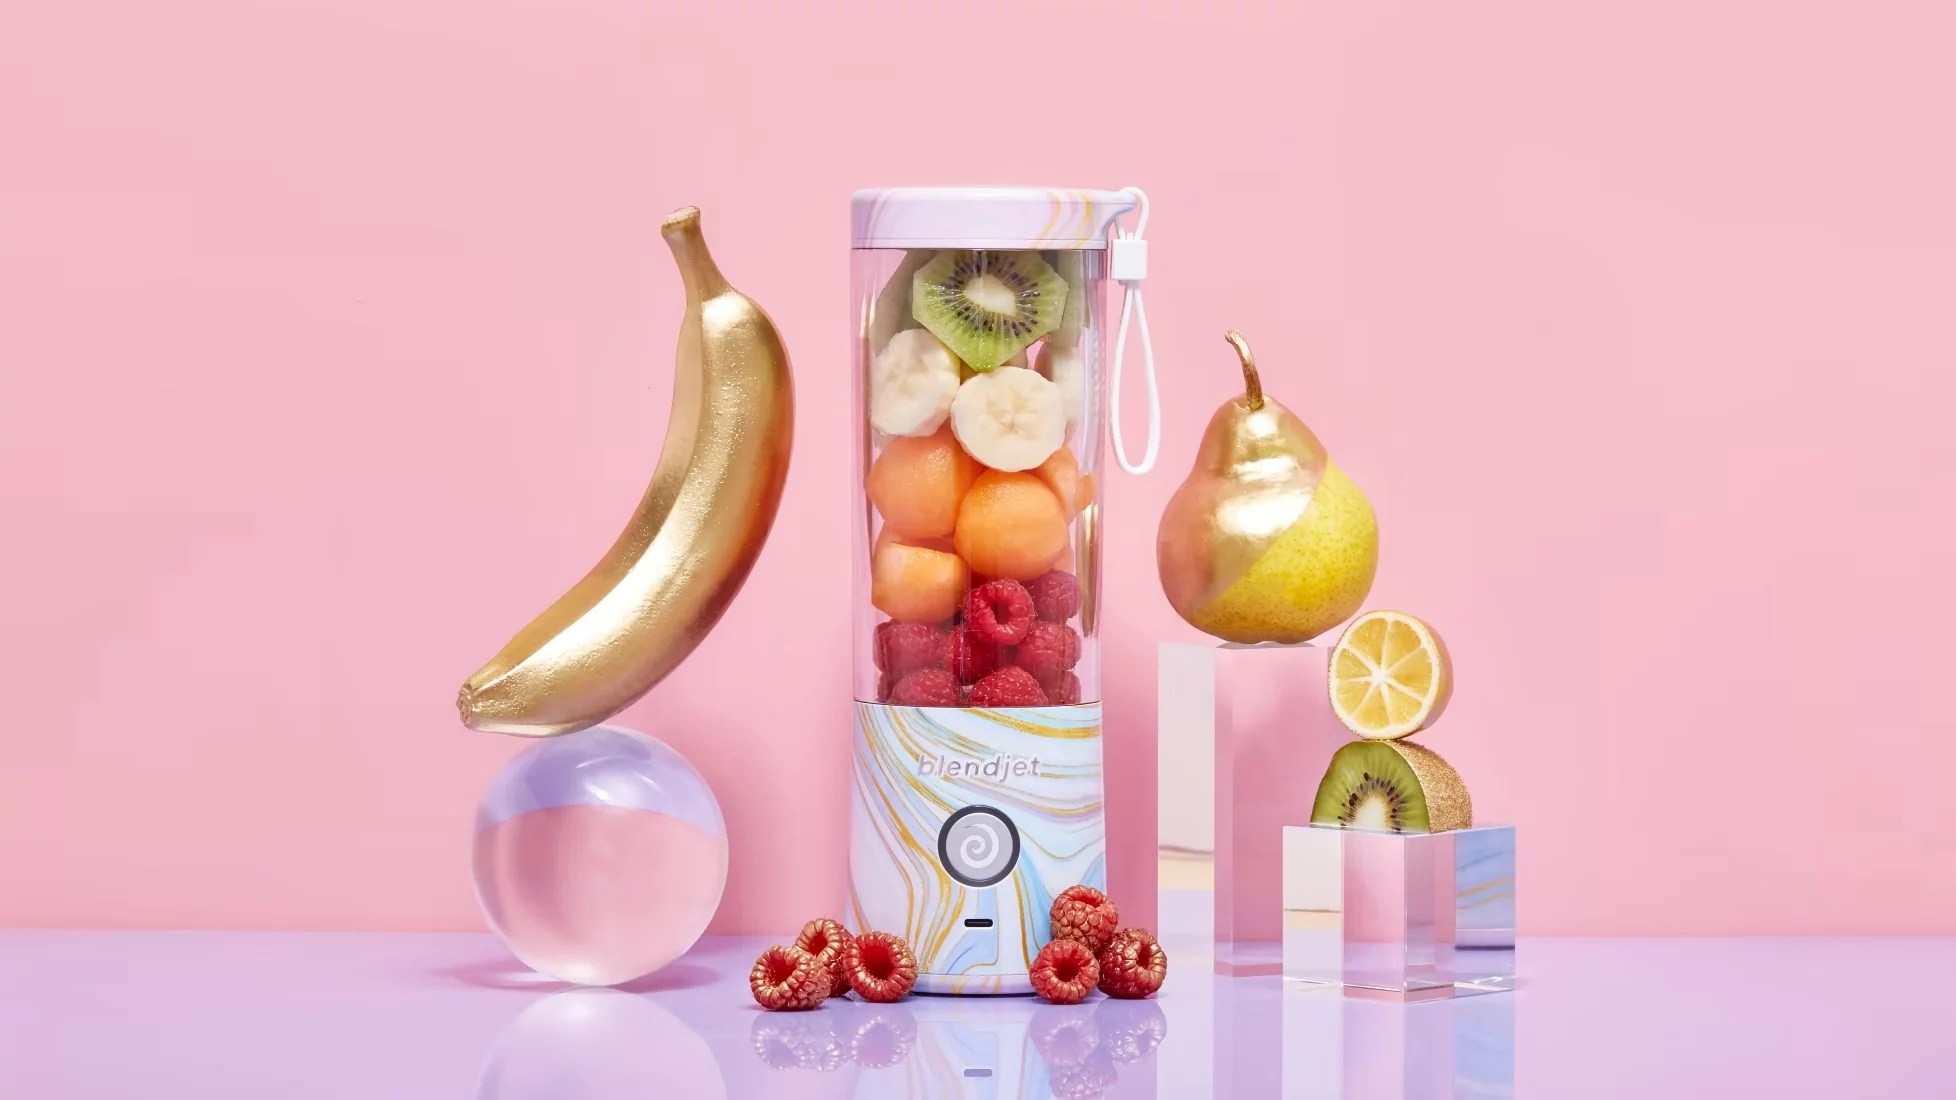 The Best Portable Blender for Smoothies and Blended Drinks on the Go